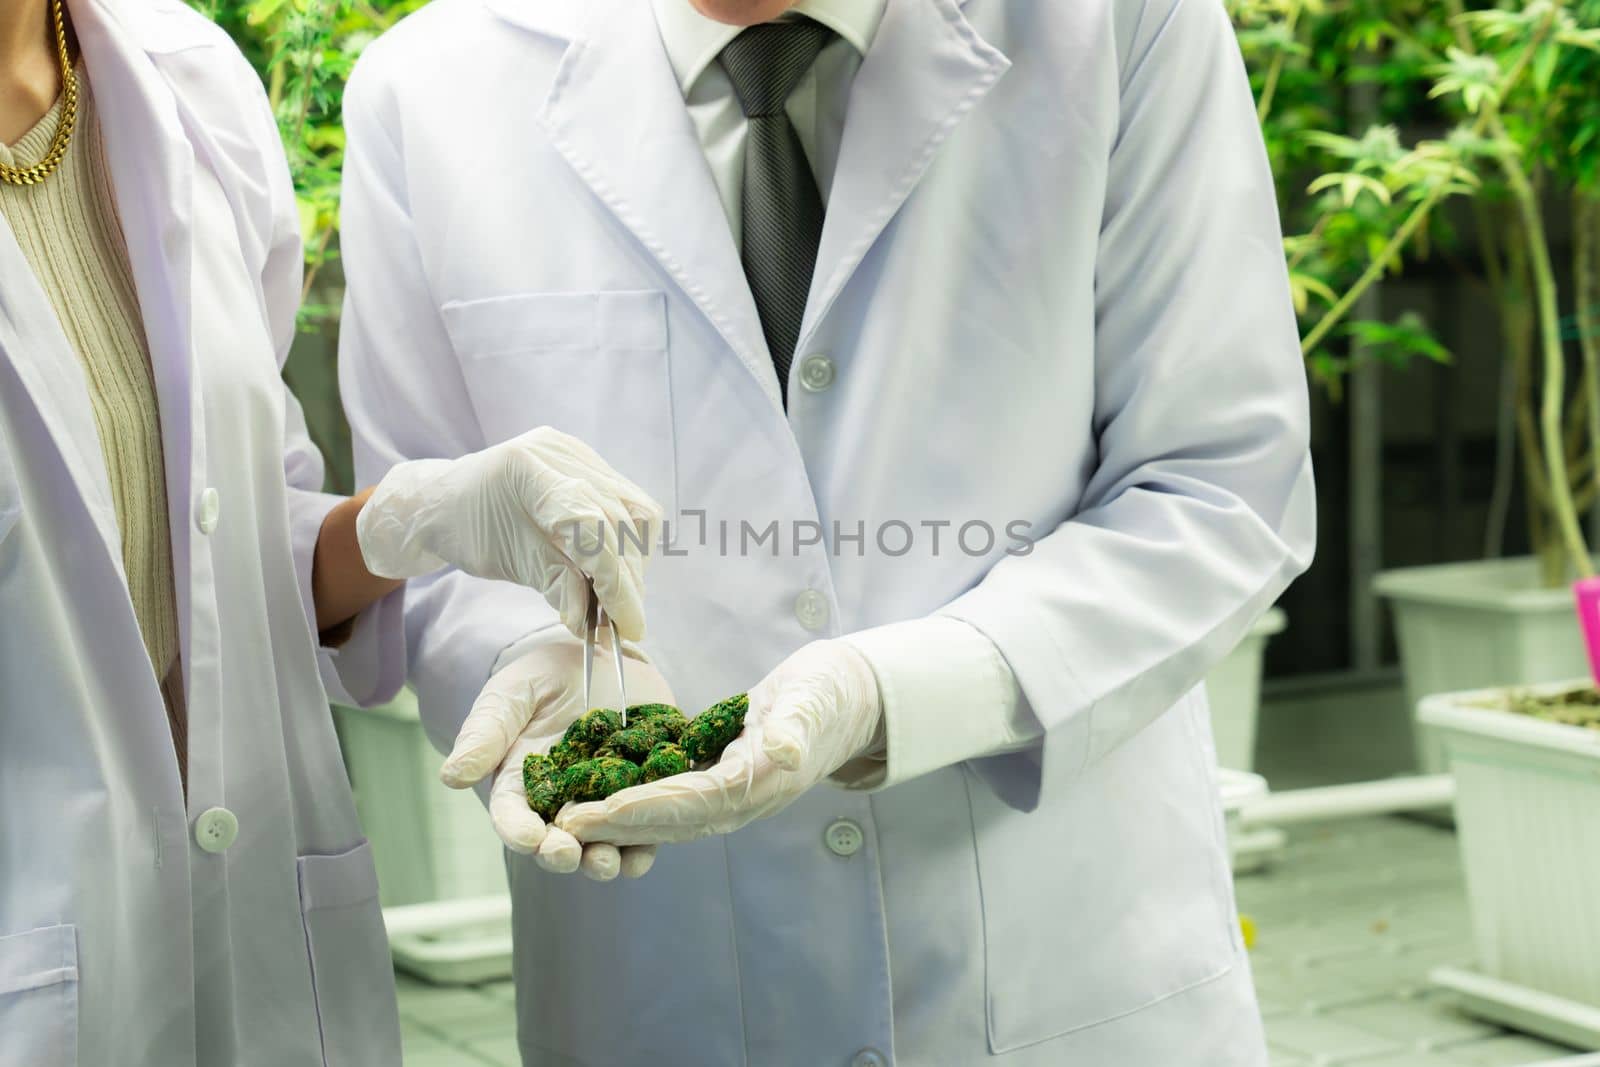 Closeup scientists grasping gratifying heap of cannabis weed buds with tweezers harvested from a curative indoor cannabis plant hydroponic farm. Cannabis farm in grow facility for high quality concept